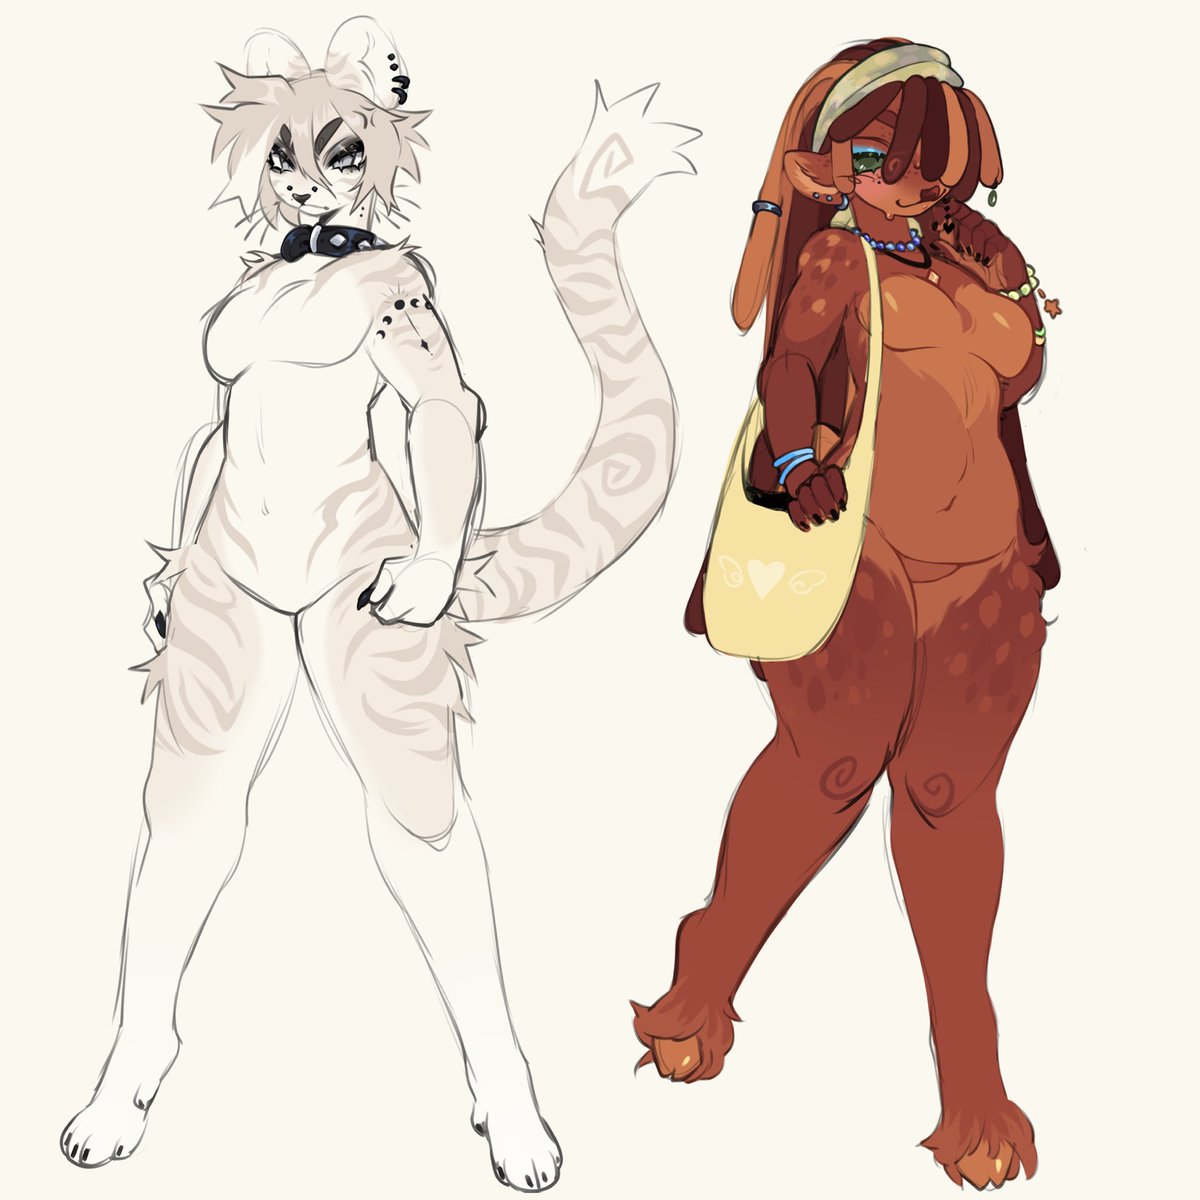 Adopts I made that are currently open ^^ feel free to offer